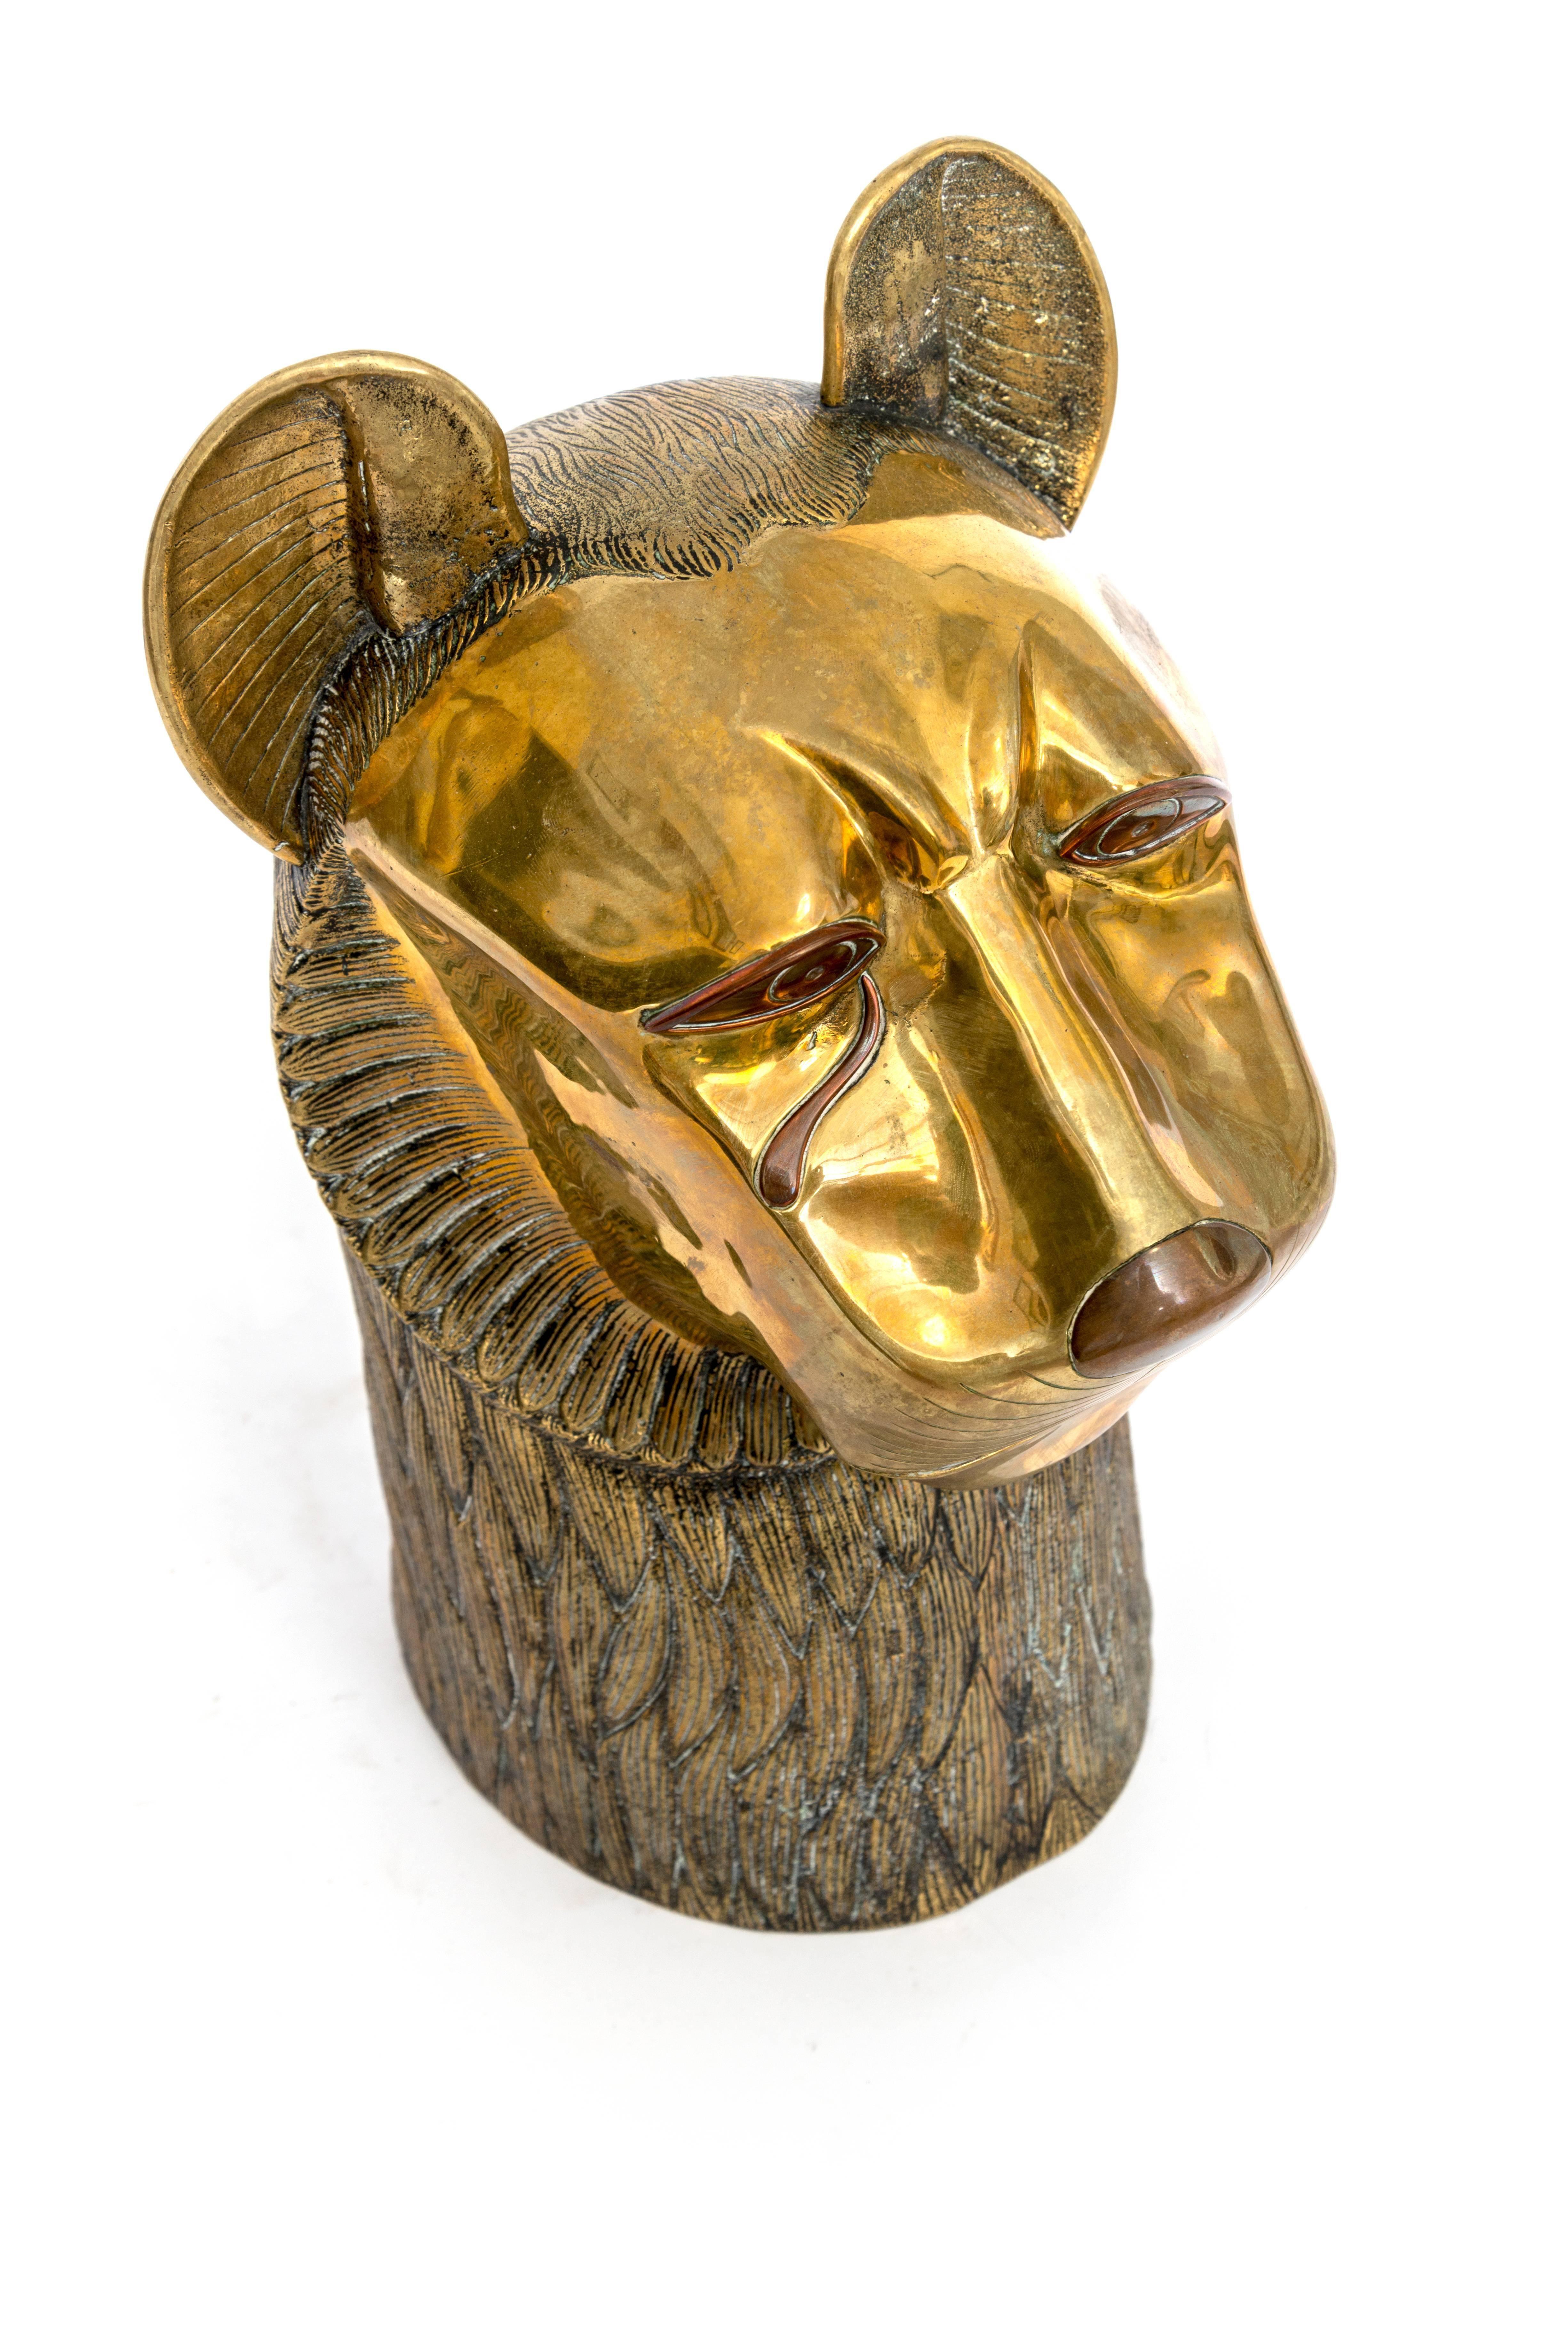  Small standing tabletop sculpture in bronze with a detail of the face of a lion, with a teardrop falling from one of his eyes.